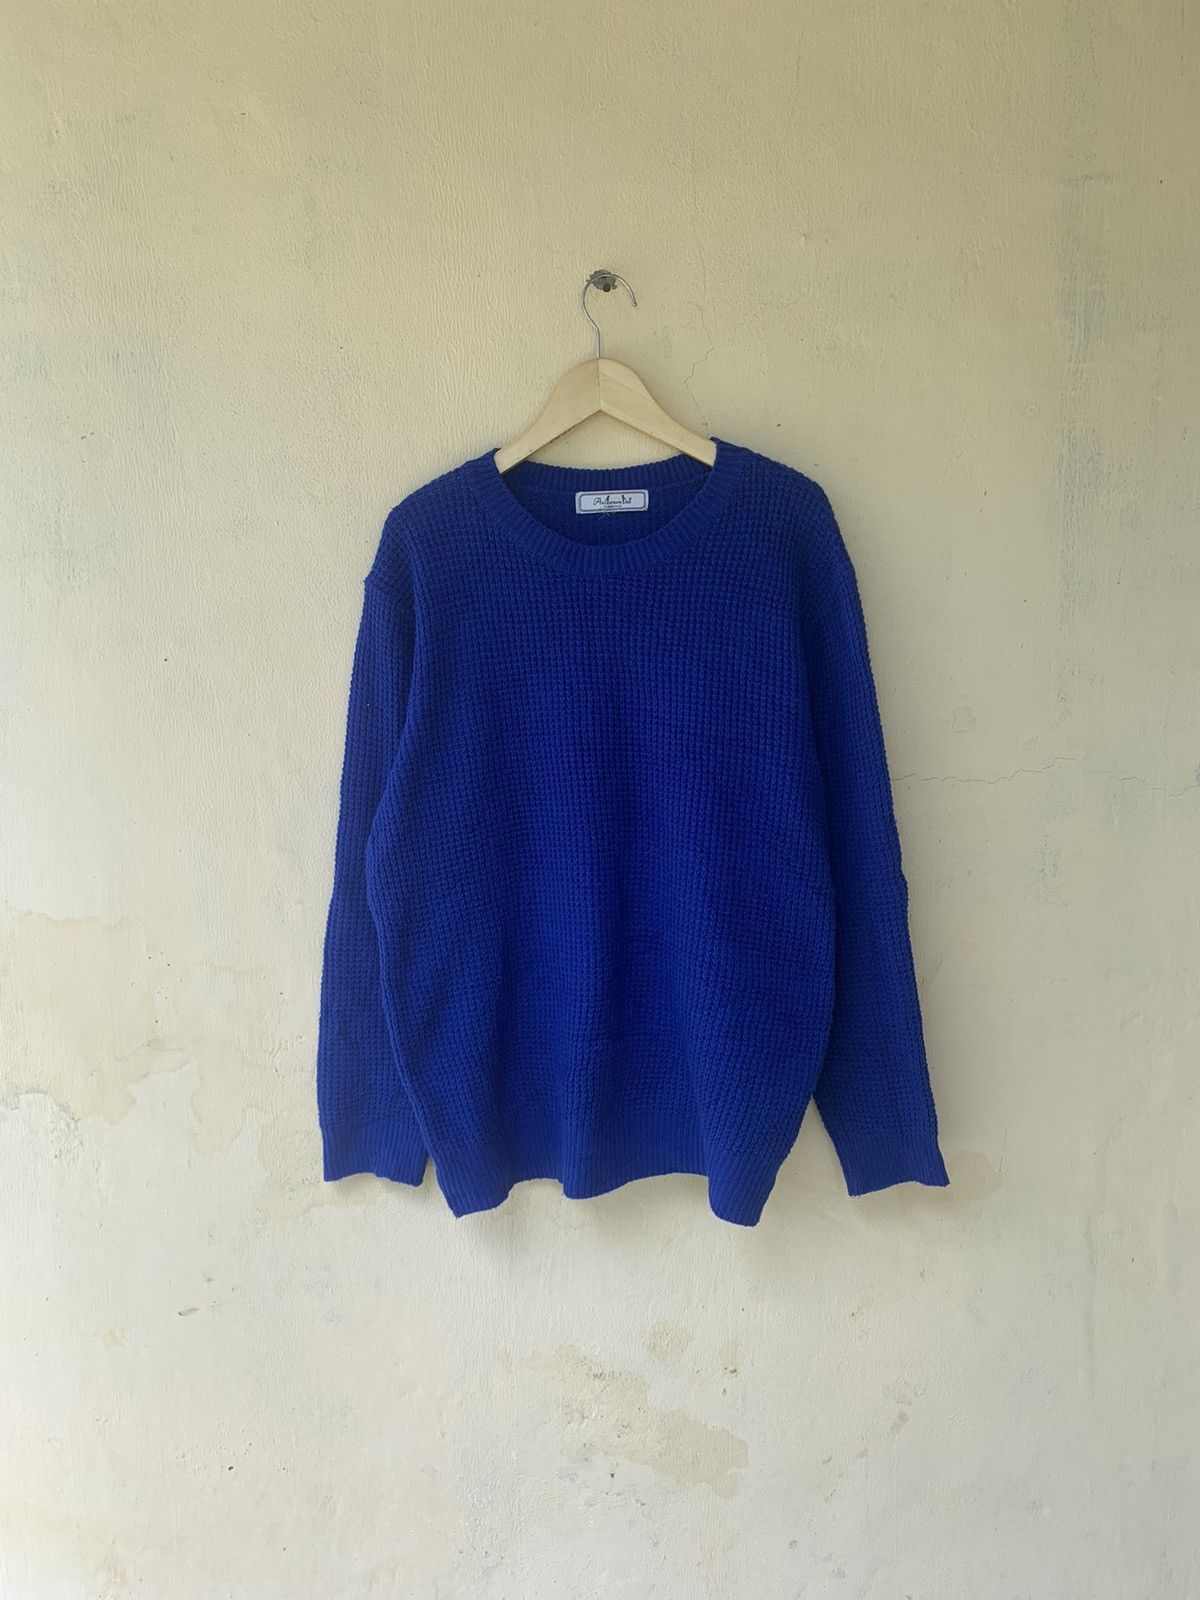 Japanese Brand Anderson bell knit sweater | Grailed